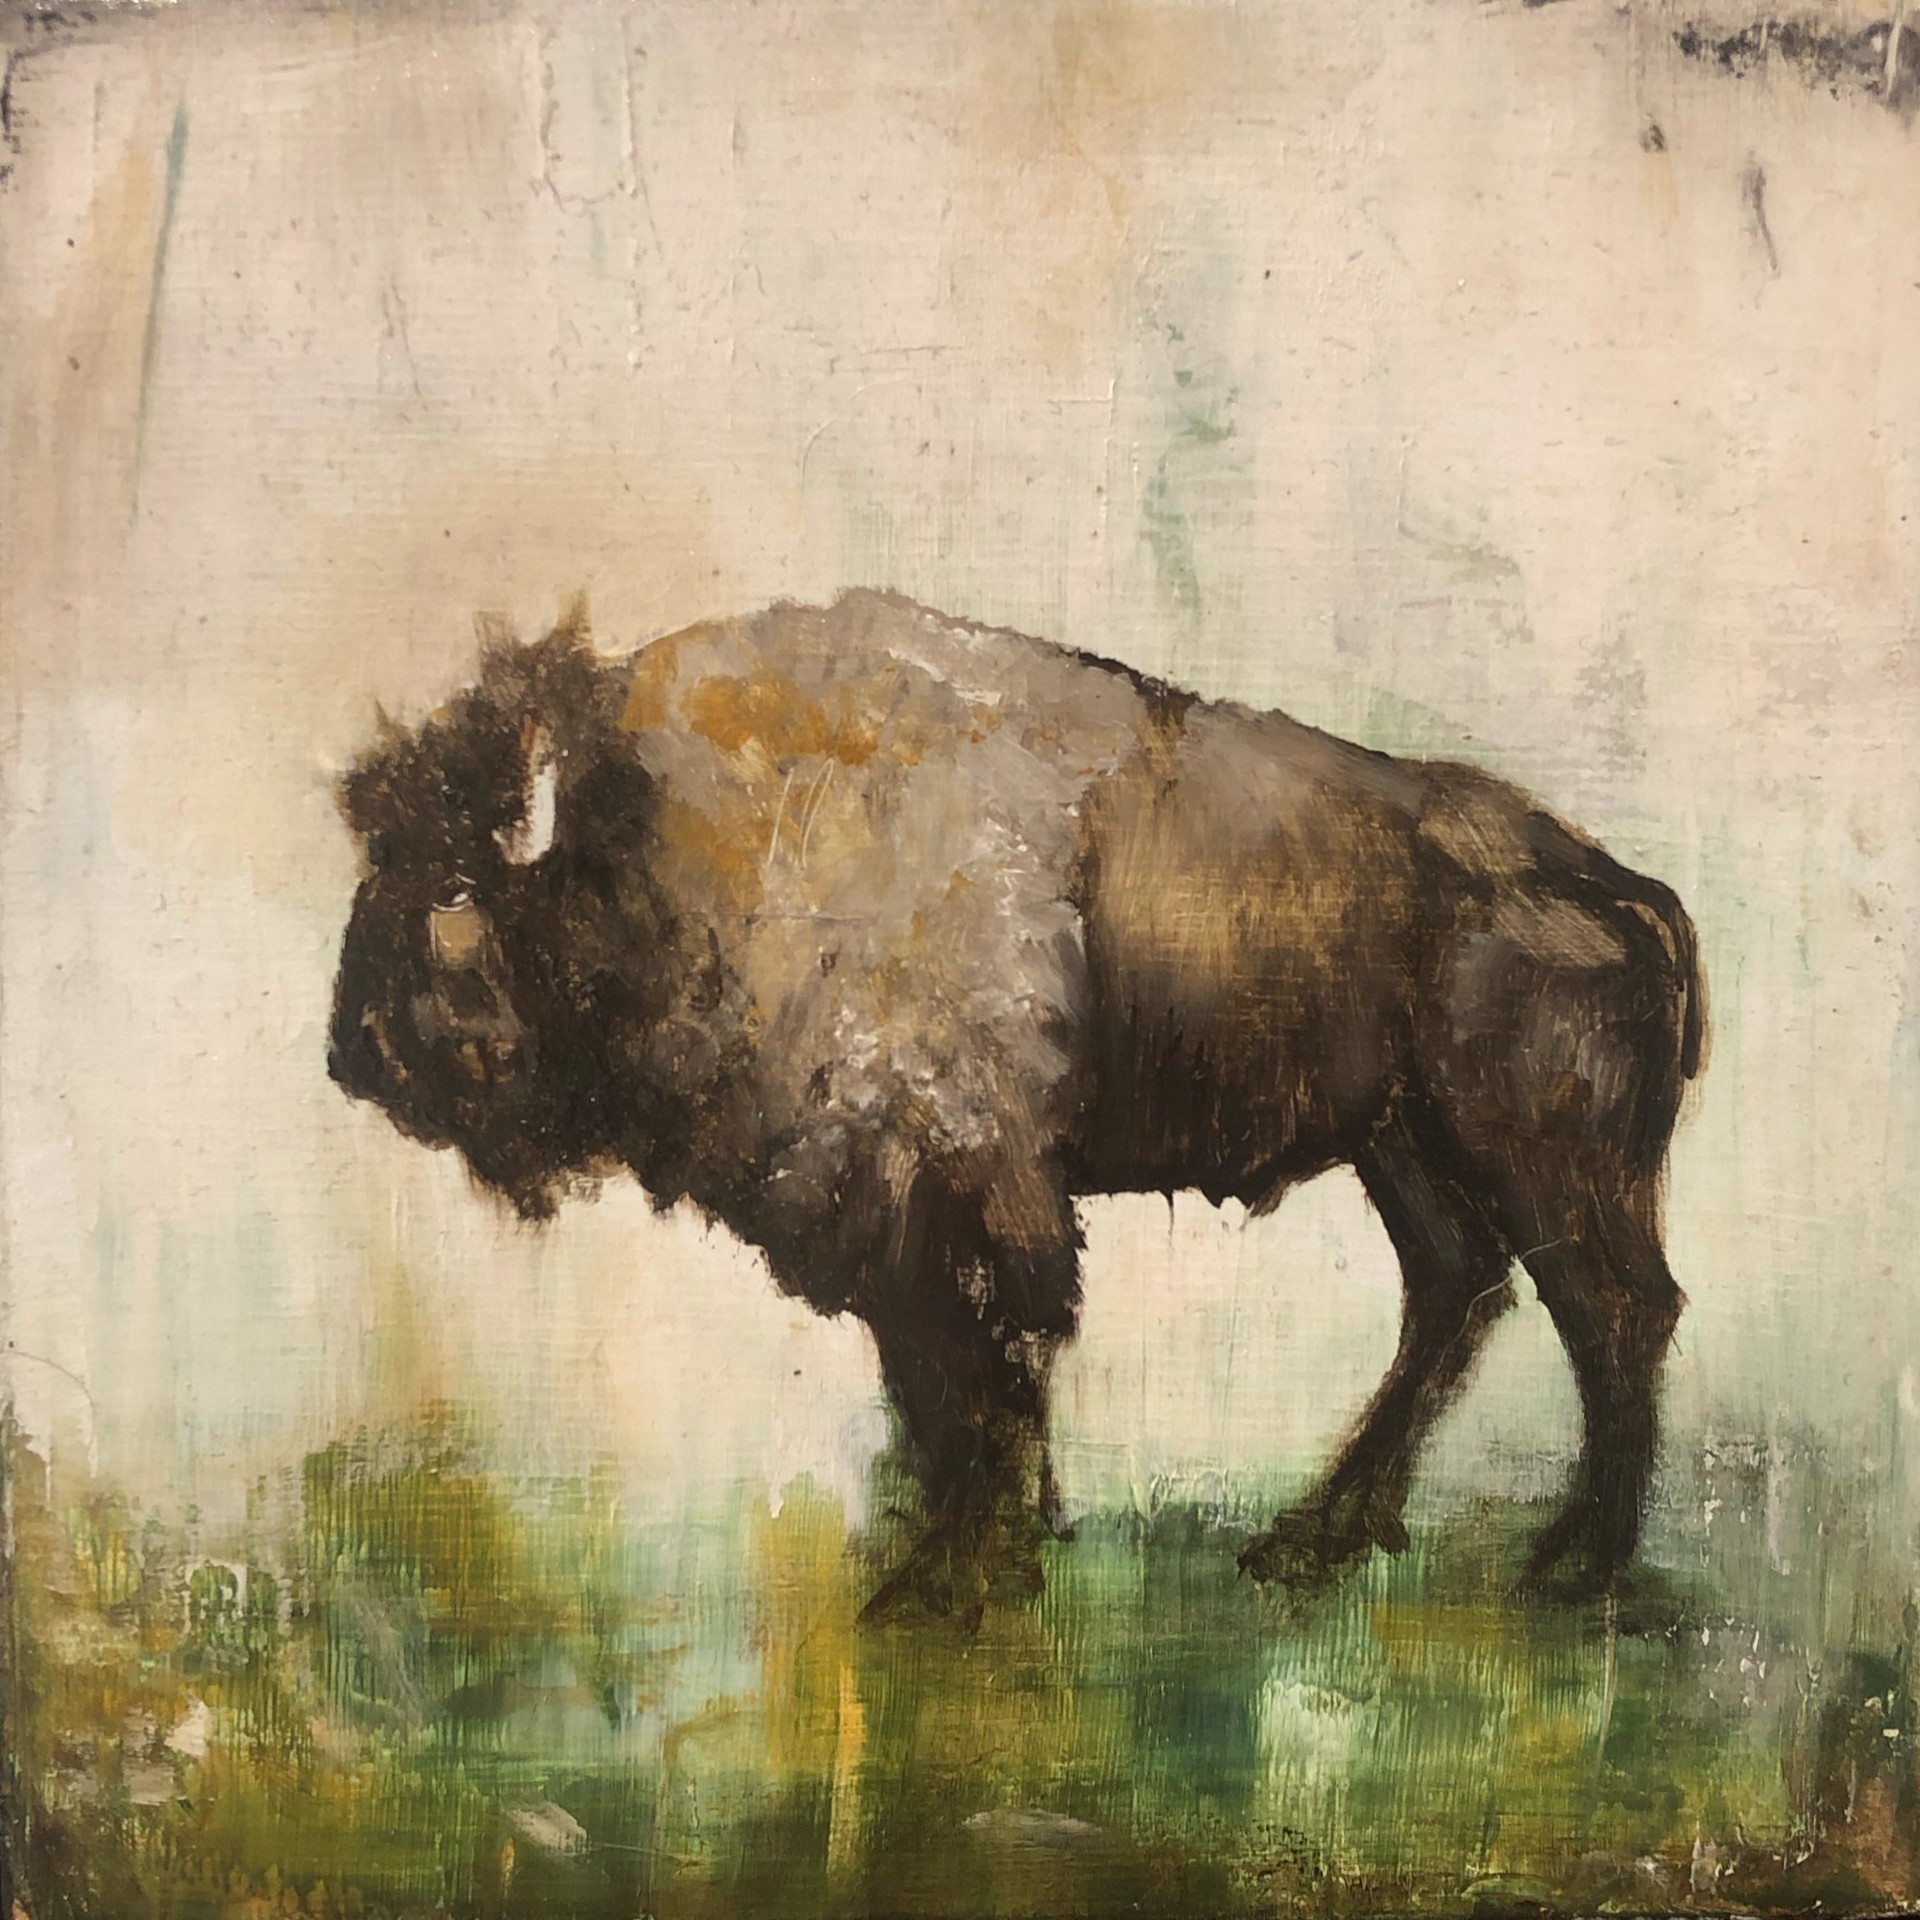 Original Painting Of A Bison Standing In Grass With A Contemporary Cream Background, By Jenna Von Benedikt